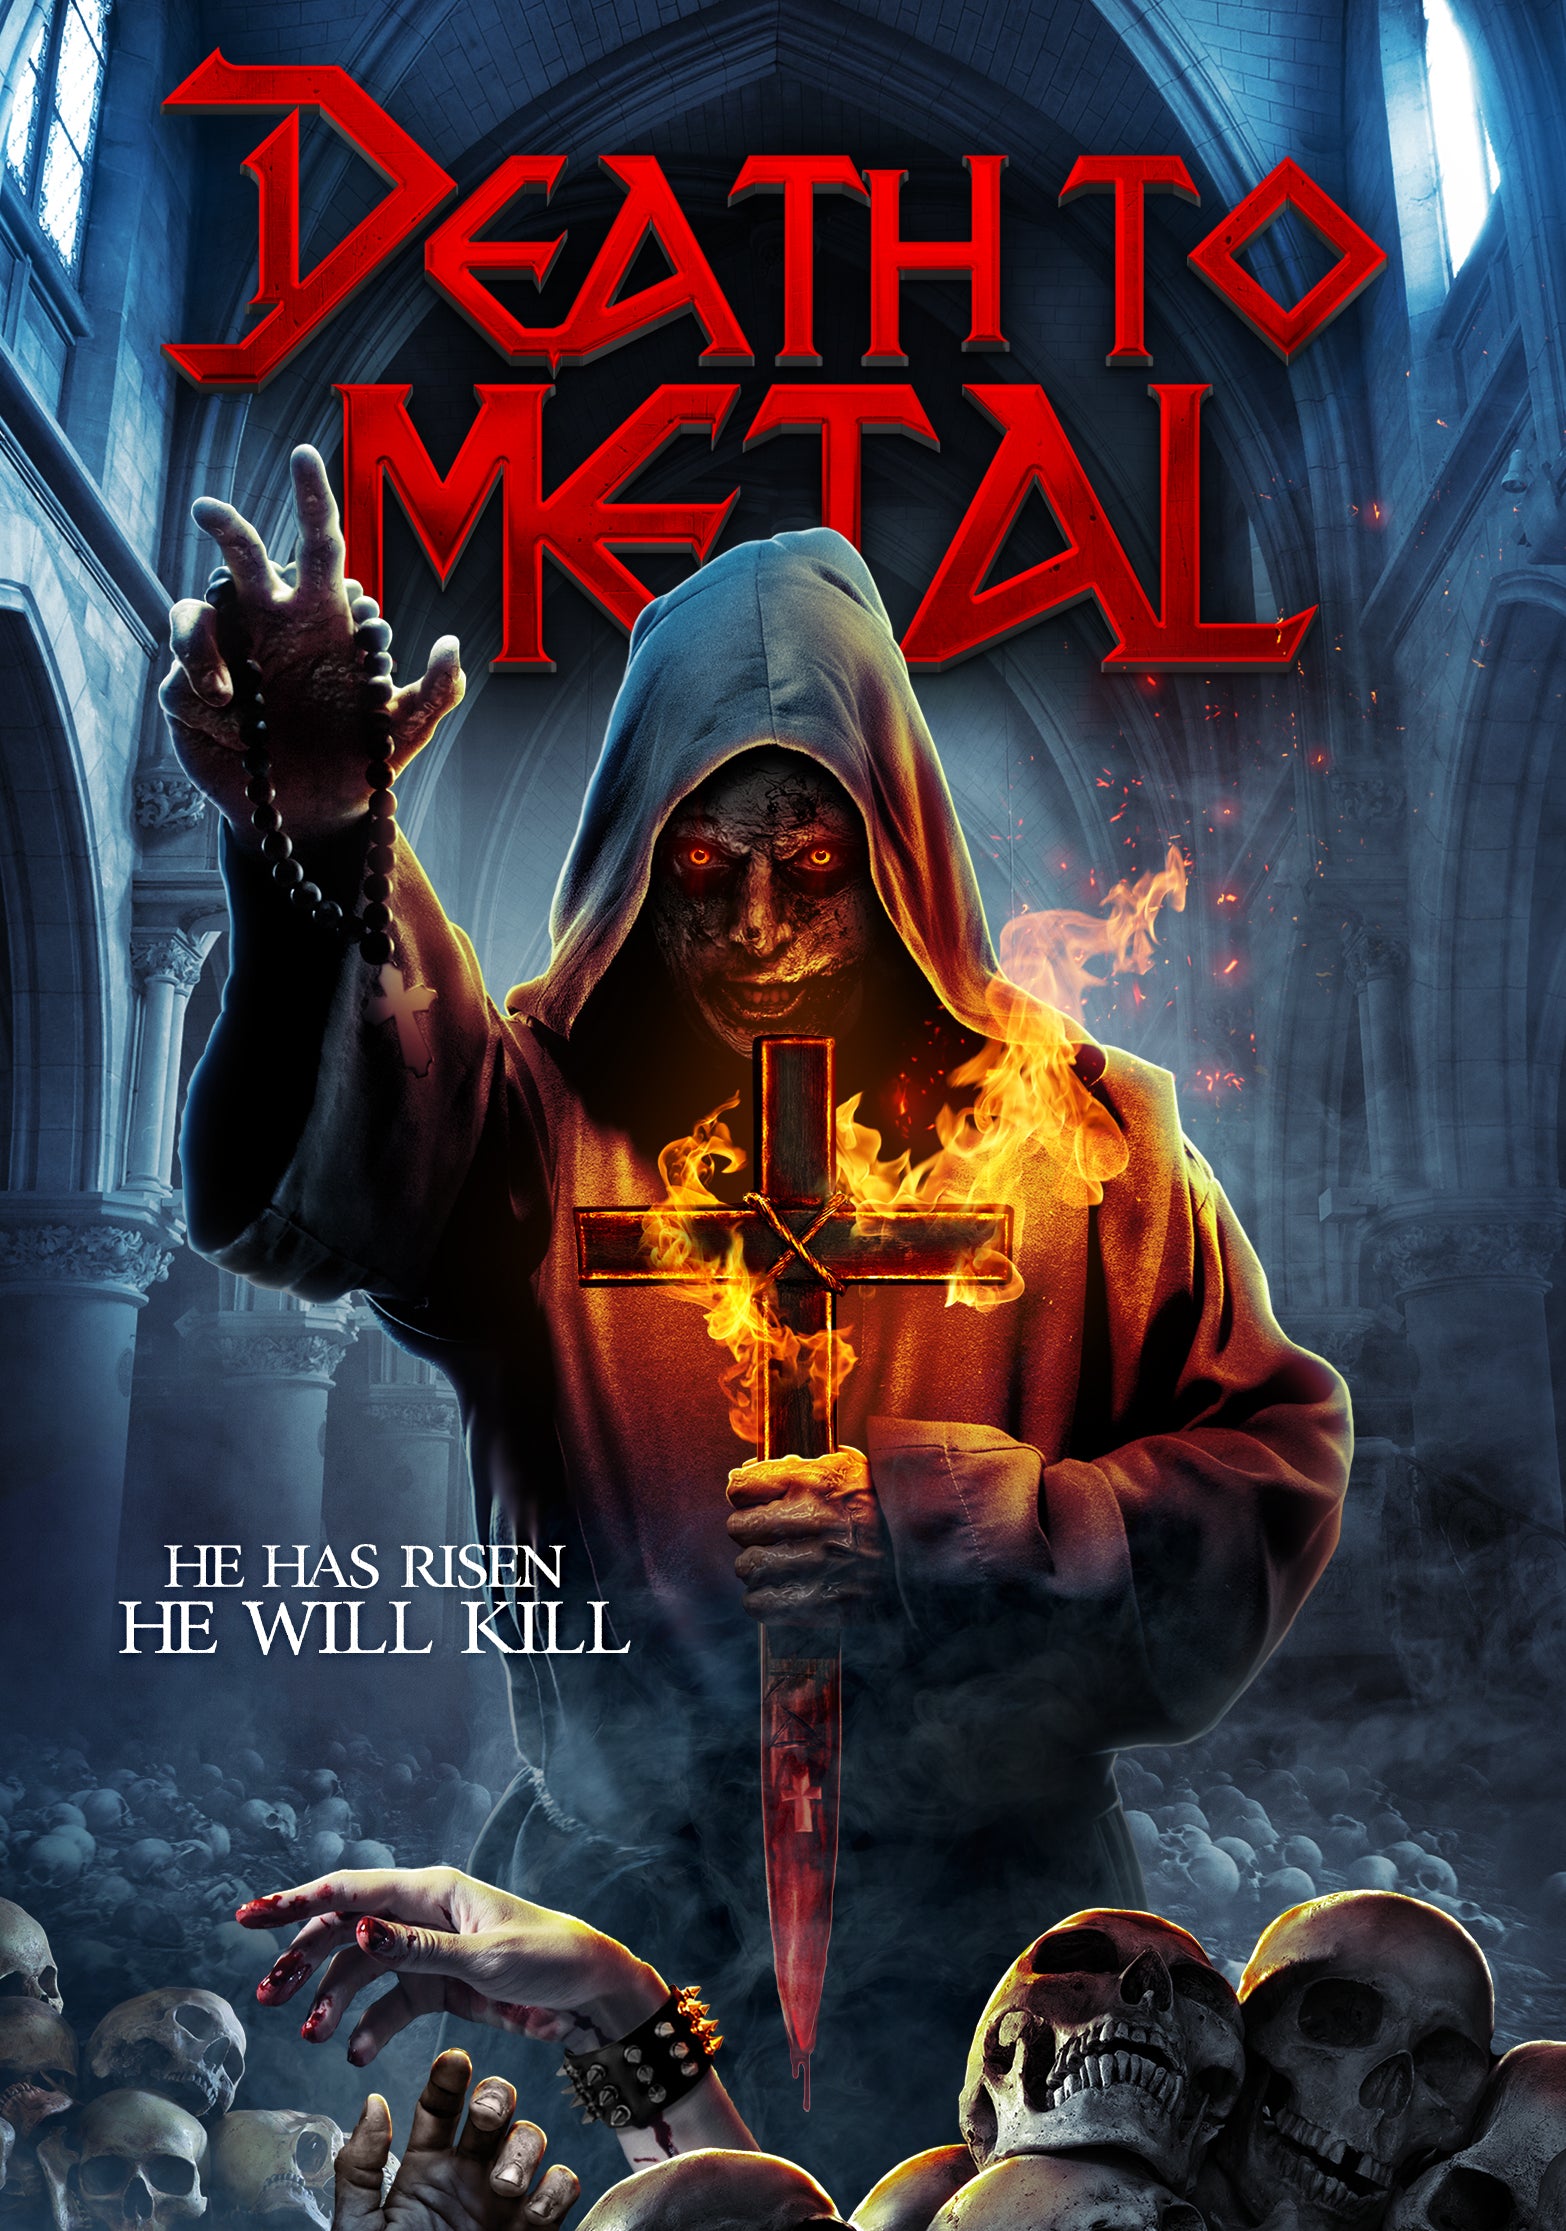 DEATH TO METAL DVD